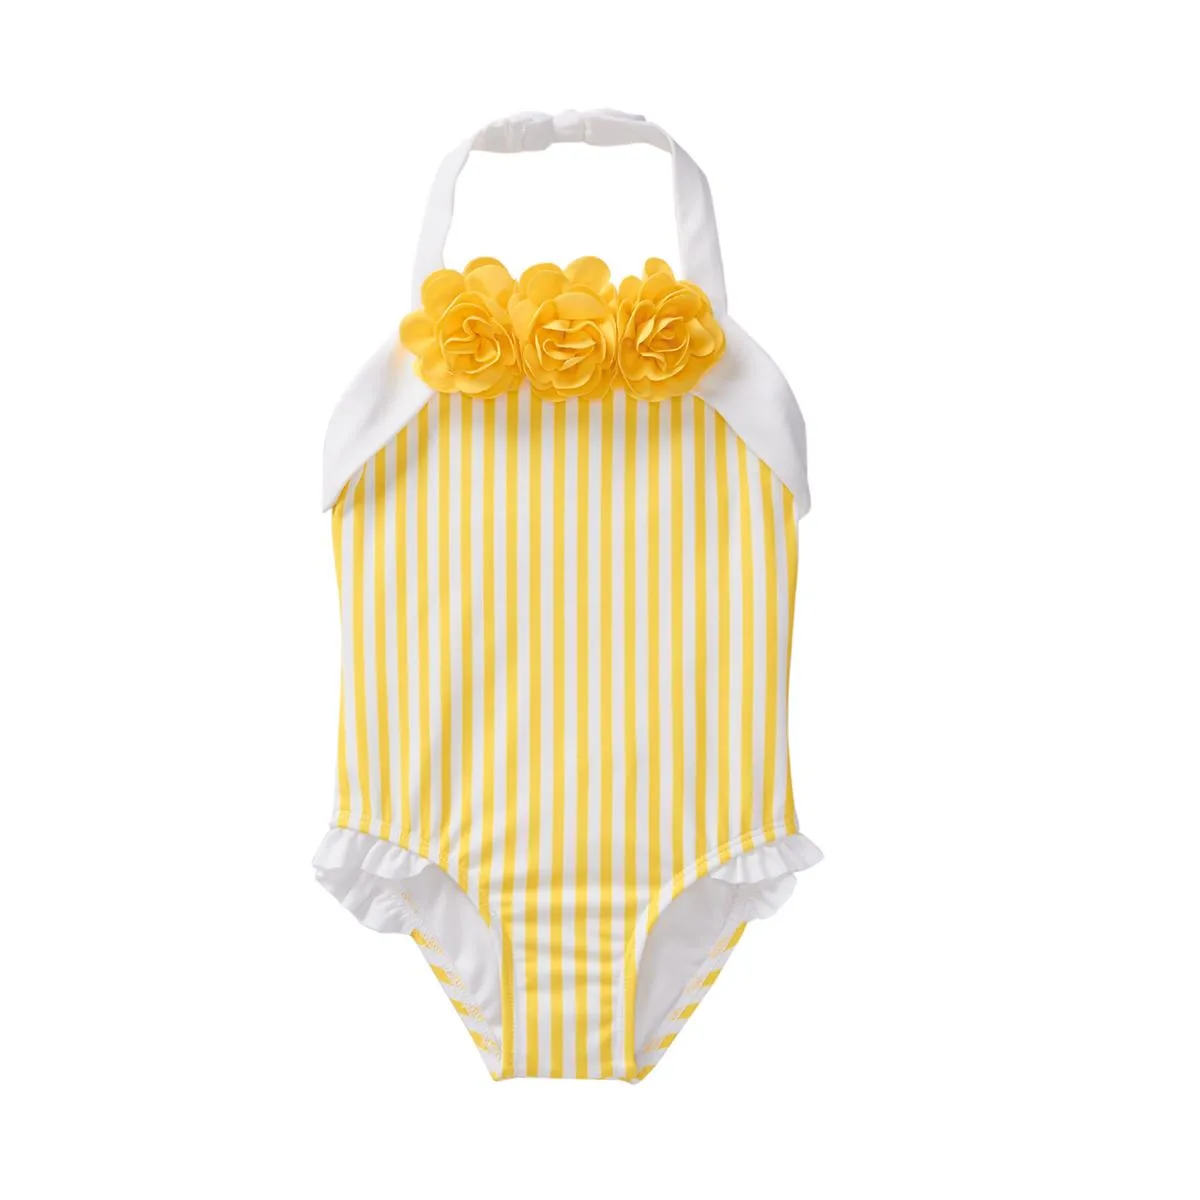 yellow Most Adorable Toddler Girl Swimsuits These are the most adorable toddler girl swimsuits I have seen this season. If you're planning on taking your toddler to the beach then check out these tips for a happy vacation.  There are super cute girl bathing suits to fit any budget.  This post does contain affiliate links, any purchase you make doesn't cost you anything and helps support this site.